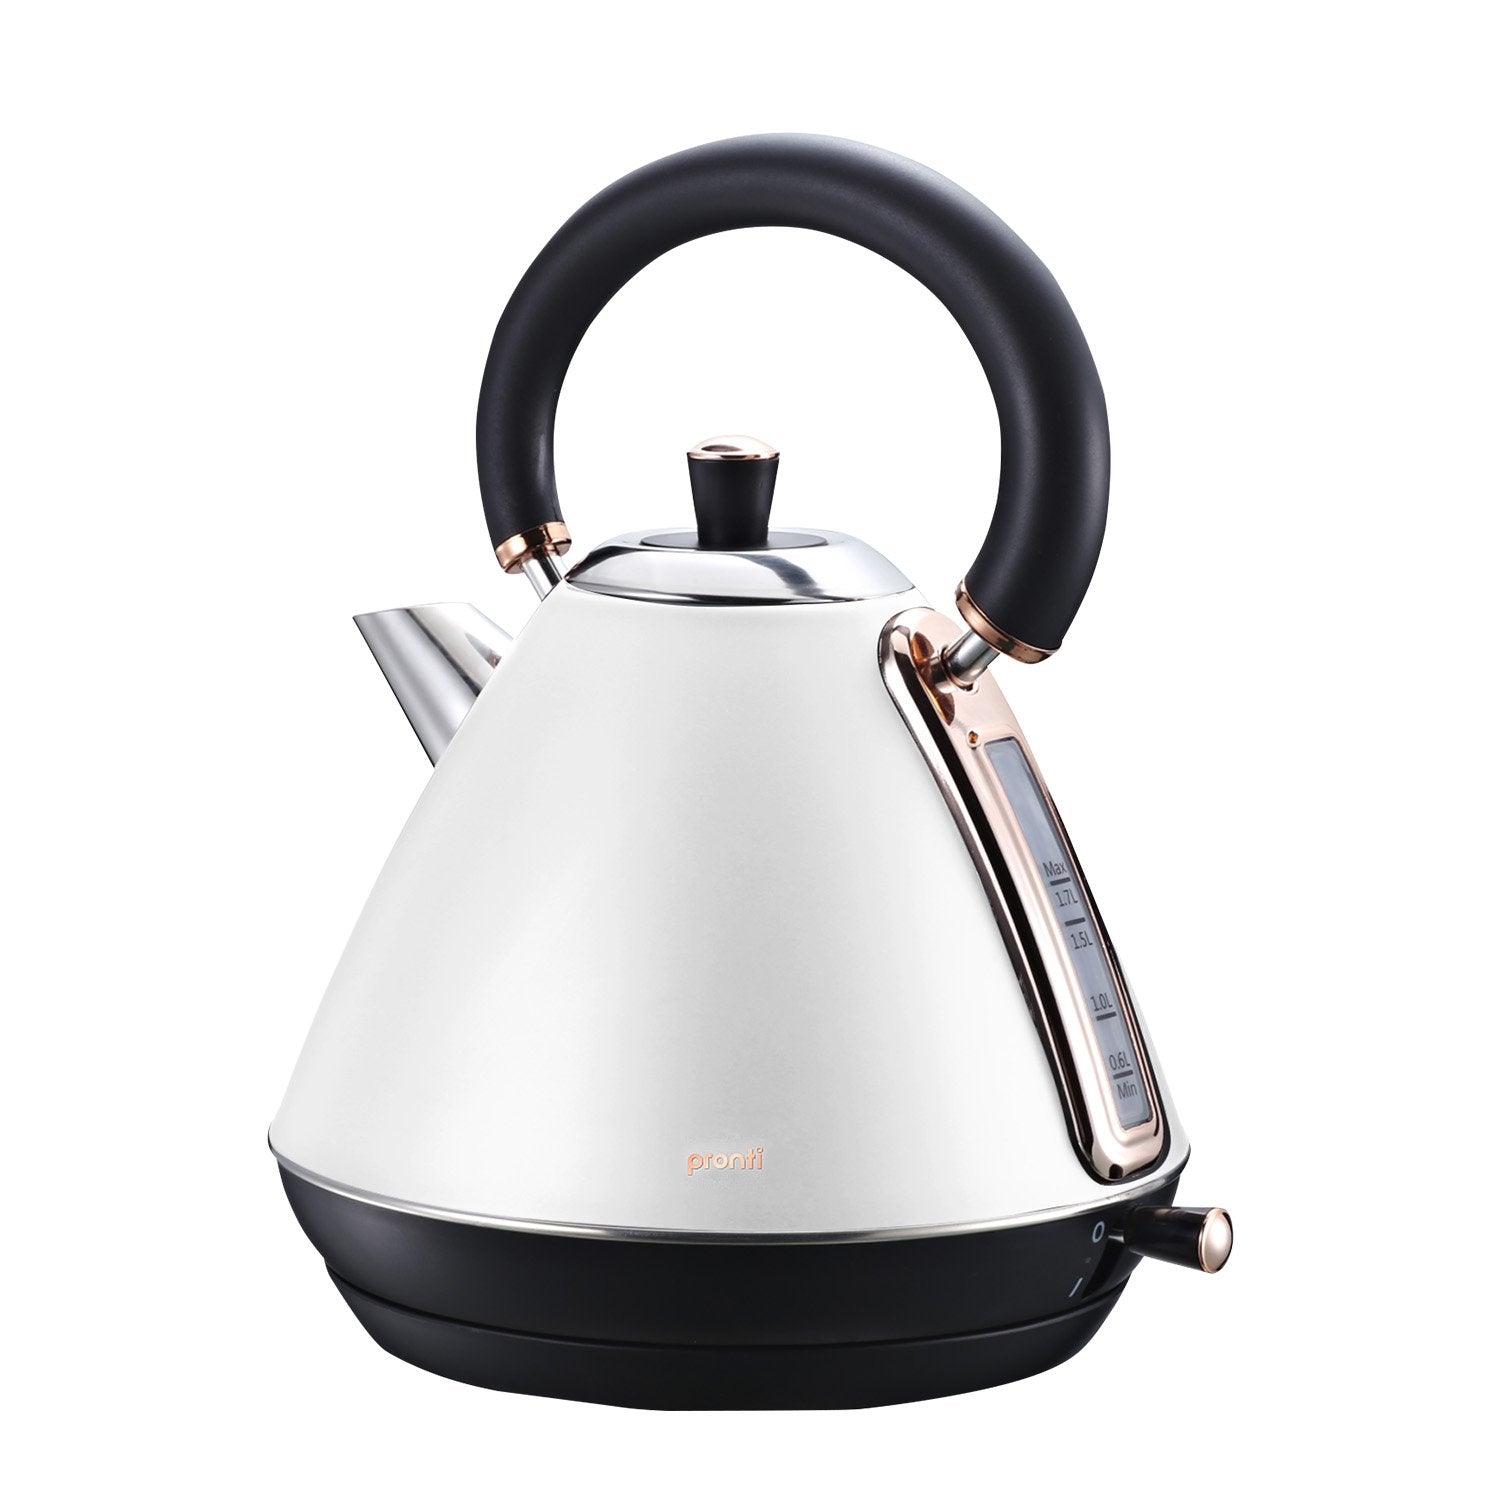 Pronti Rose Trim Collection Toaster & Kettle Bundle - White - 0